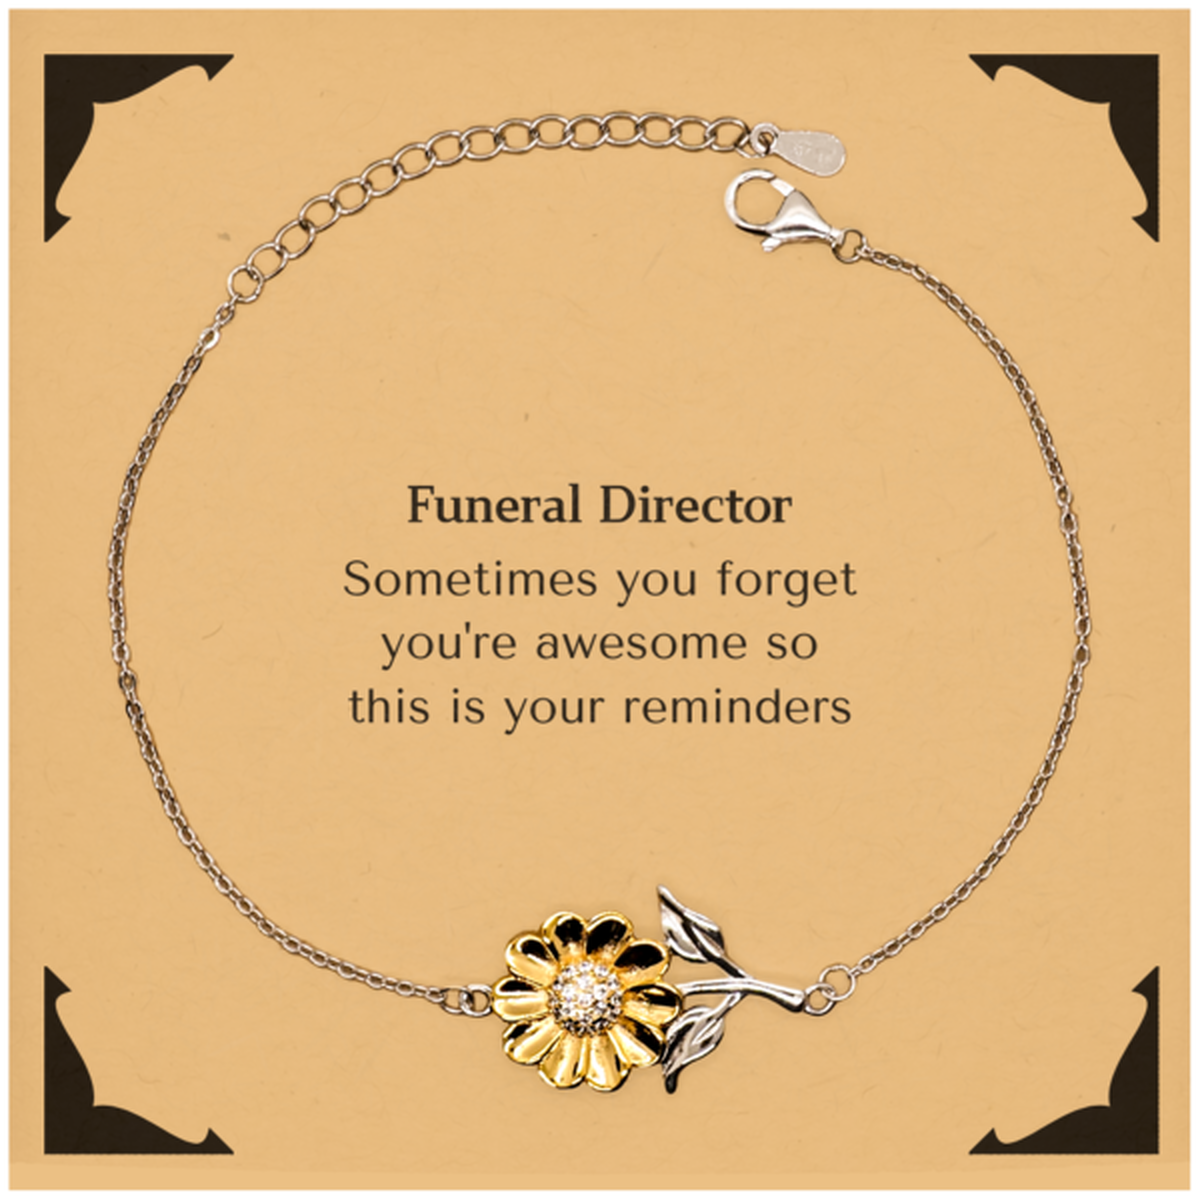 Sentimental Funeral Director Sunflower Bracelet, Funeral Director Sometimes you forget you're awesome so this is your reminders, Graduation Christmas Birthday Gifts for Funeral Director, Men, Women, Coworkers